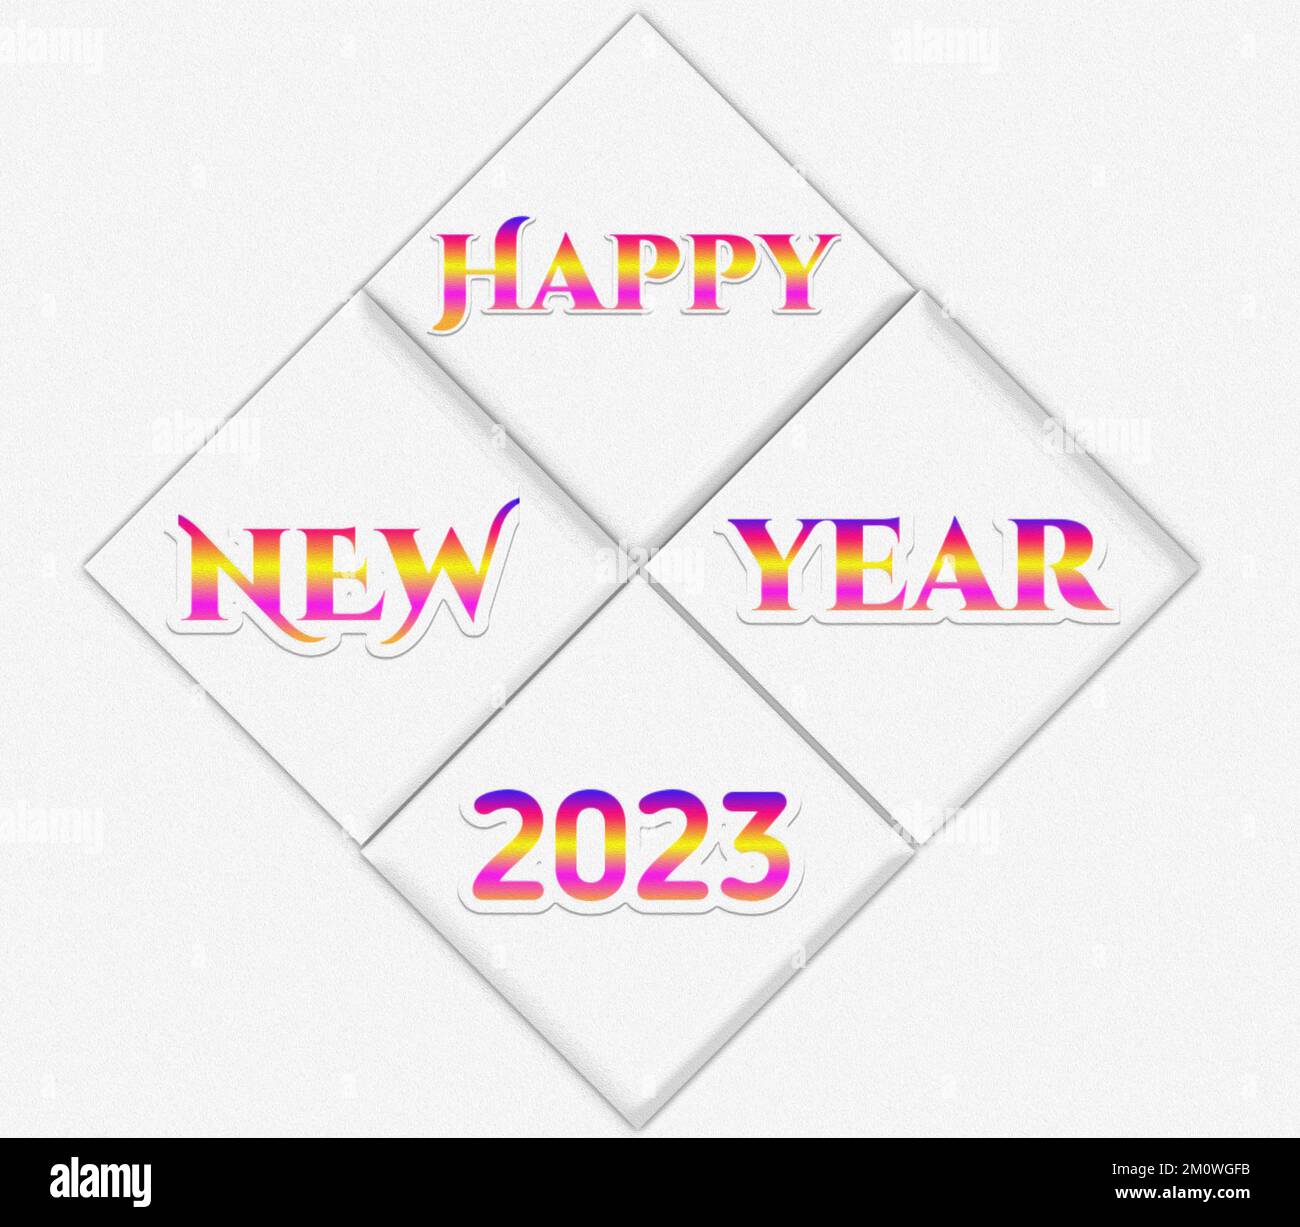 Abstract colorful Happy New Year 2023 lettering isolated on white background with shapes. Greeting card design template Stock Photo